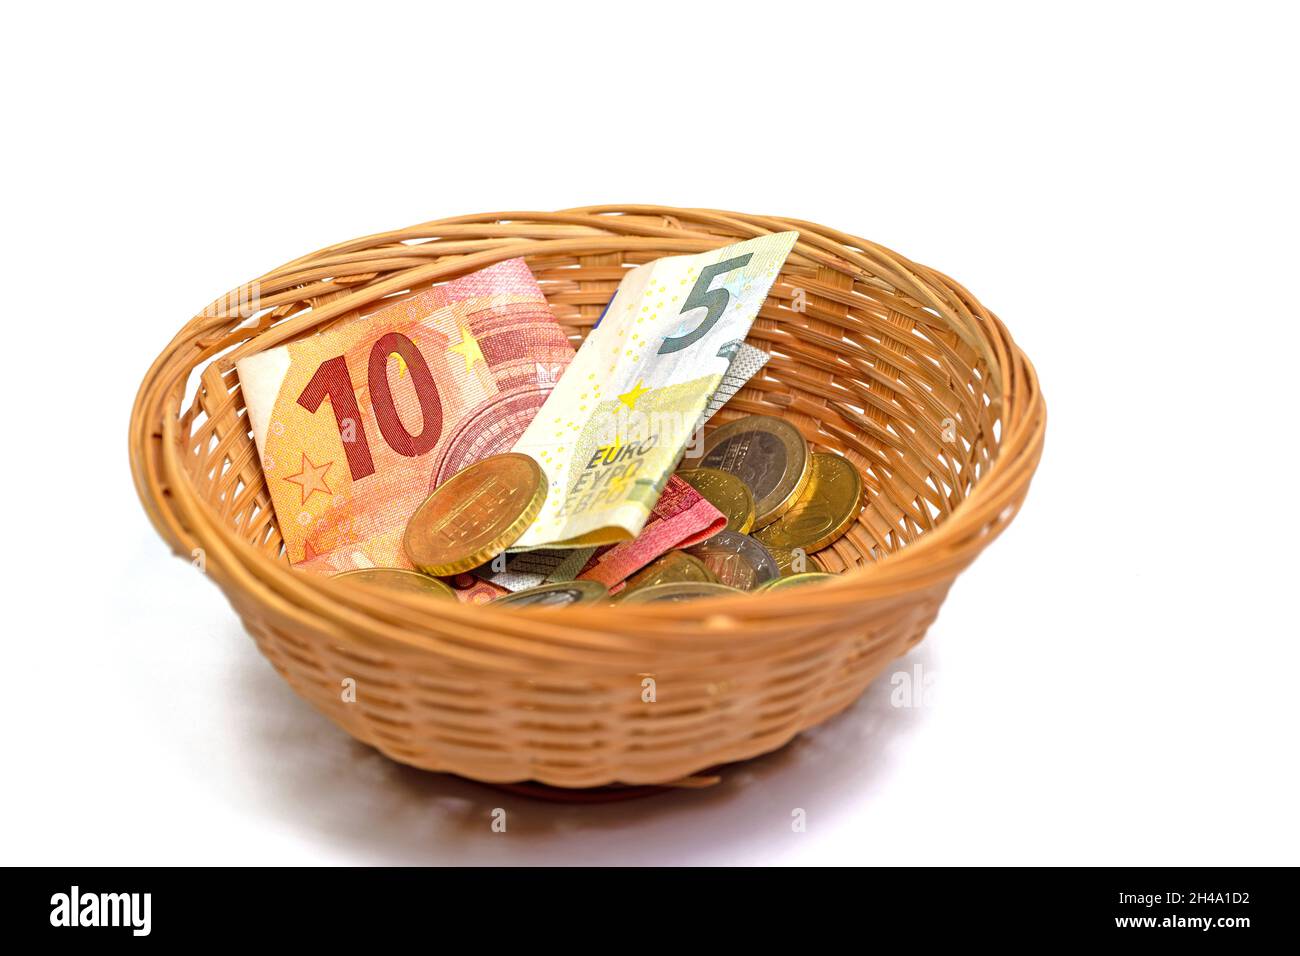 Banknotes and coins in the basket for money collection Stock Photo